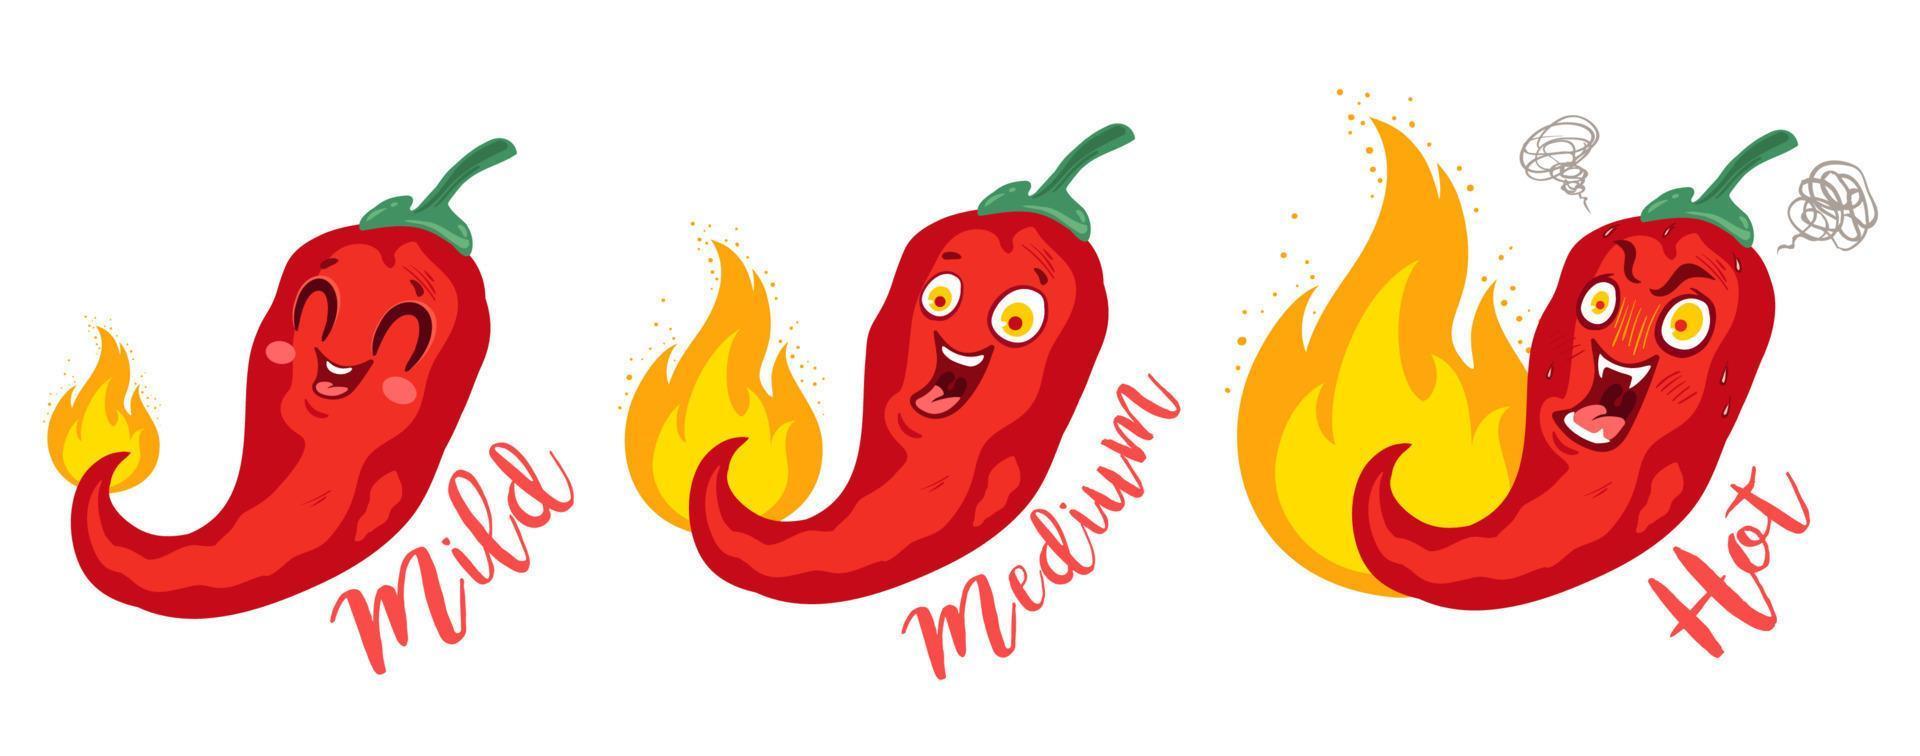 chilli for mexican or thai food vector